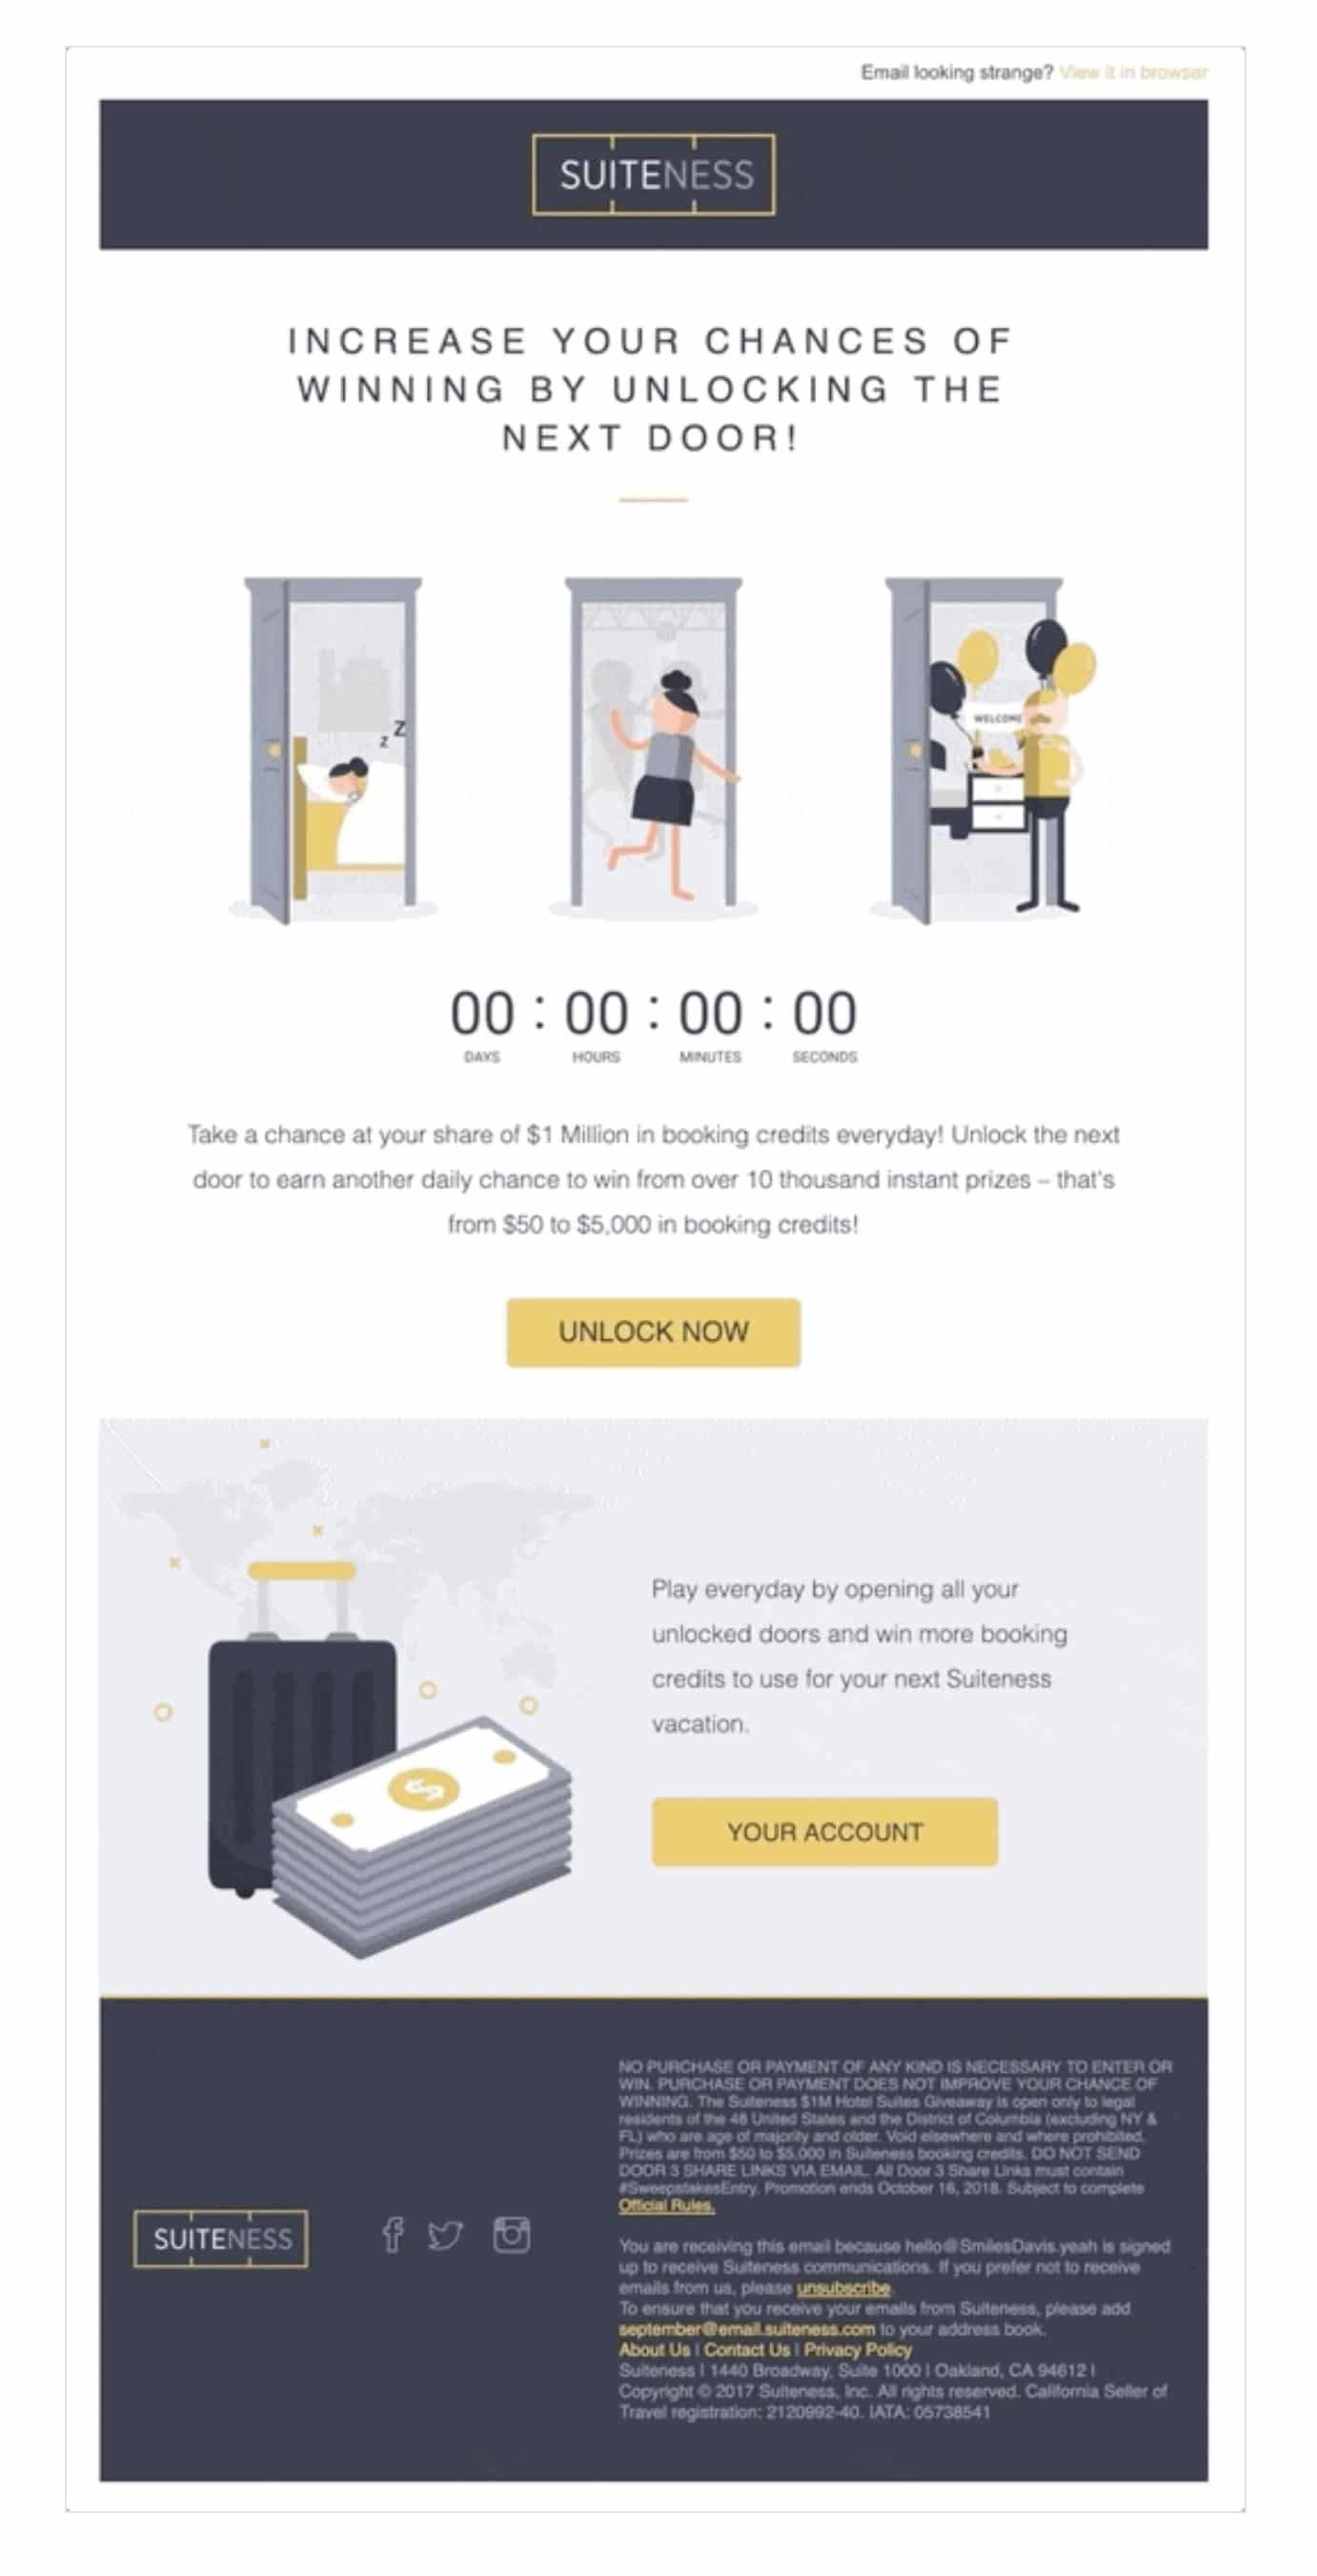 Suiteness’ contest email campaign uses a countdown timer to invite subscribers to join the contest ASAP.